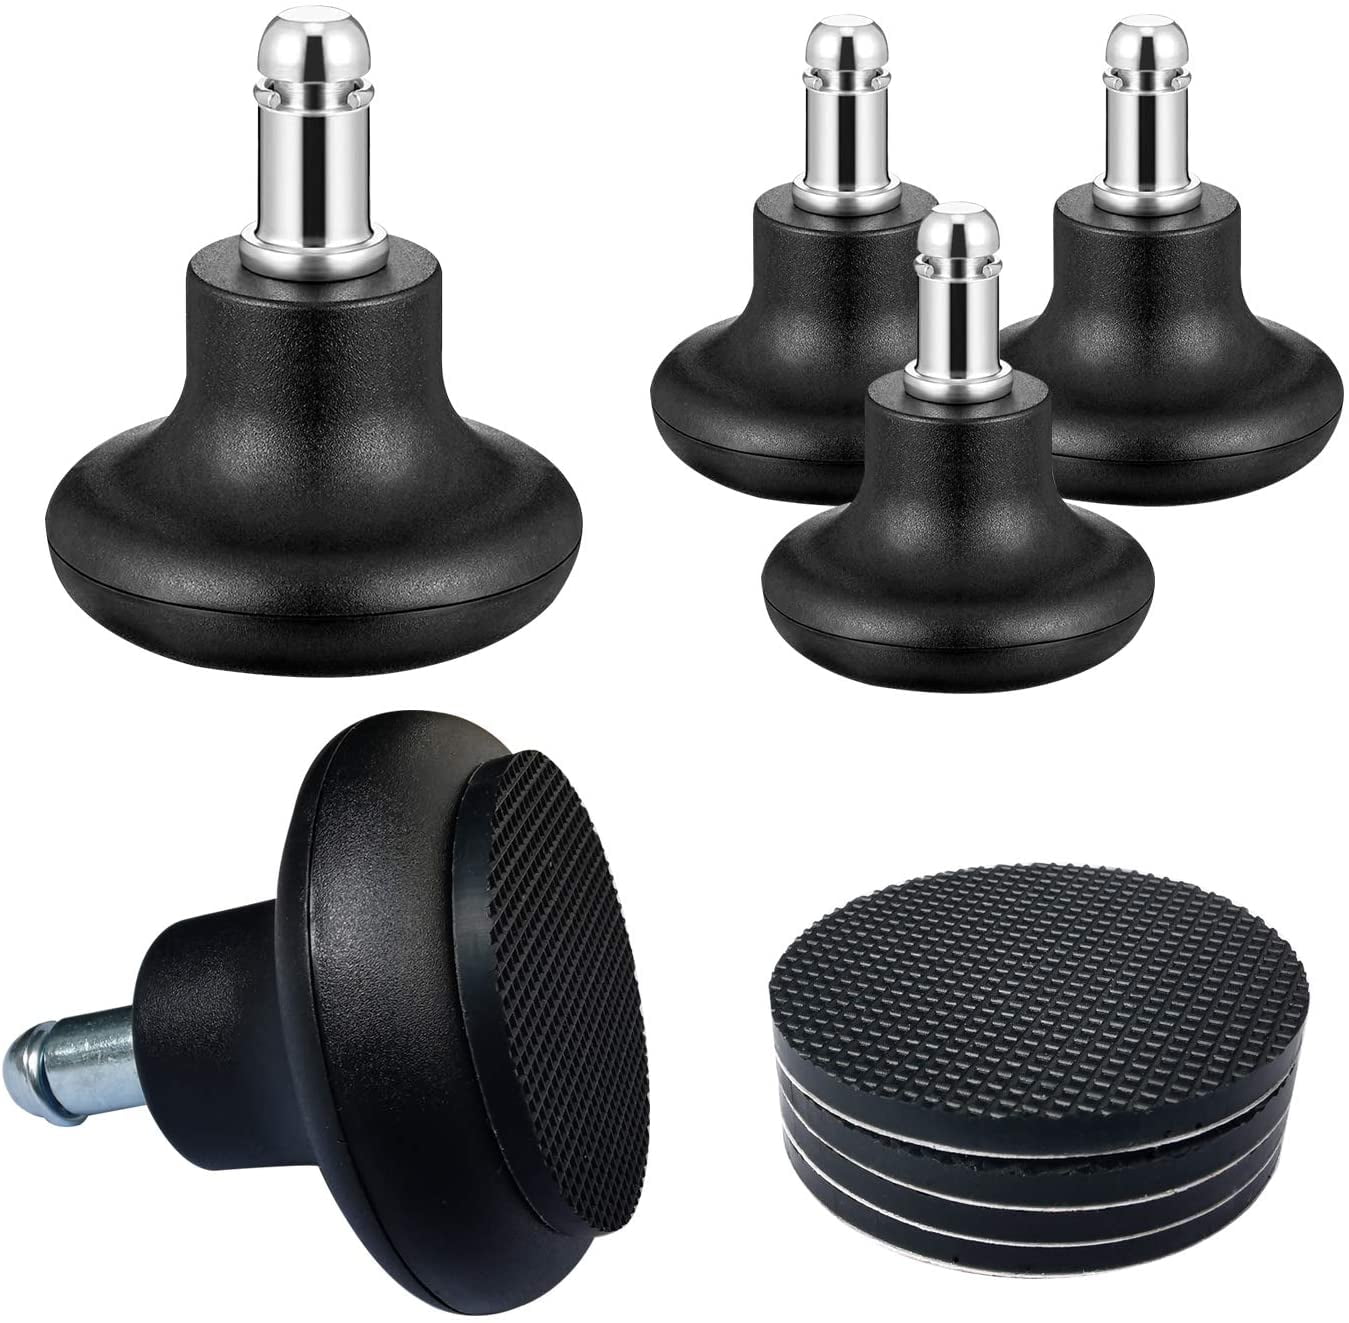 5 Bell Glide Replacement Office Chair Swivel Caster Wheel to Fixed Stationary 